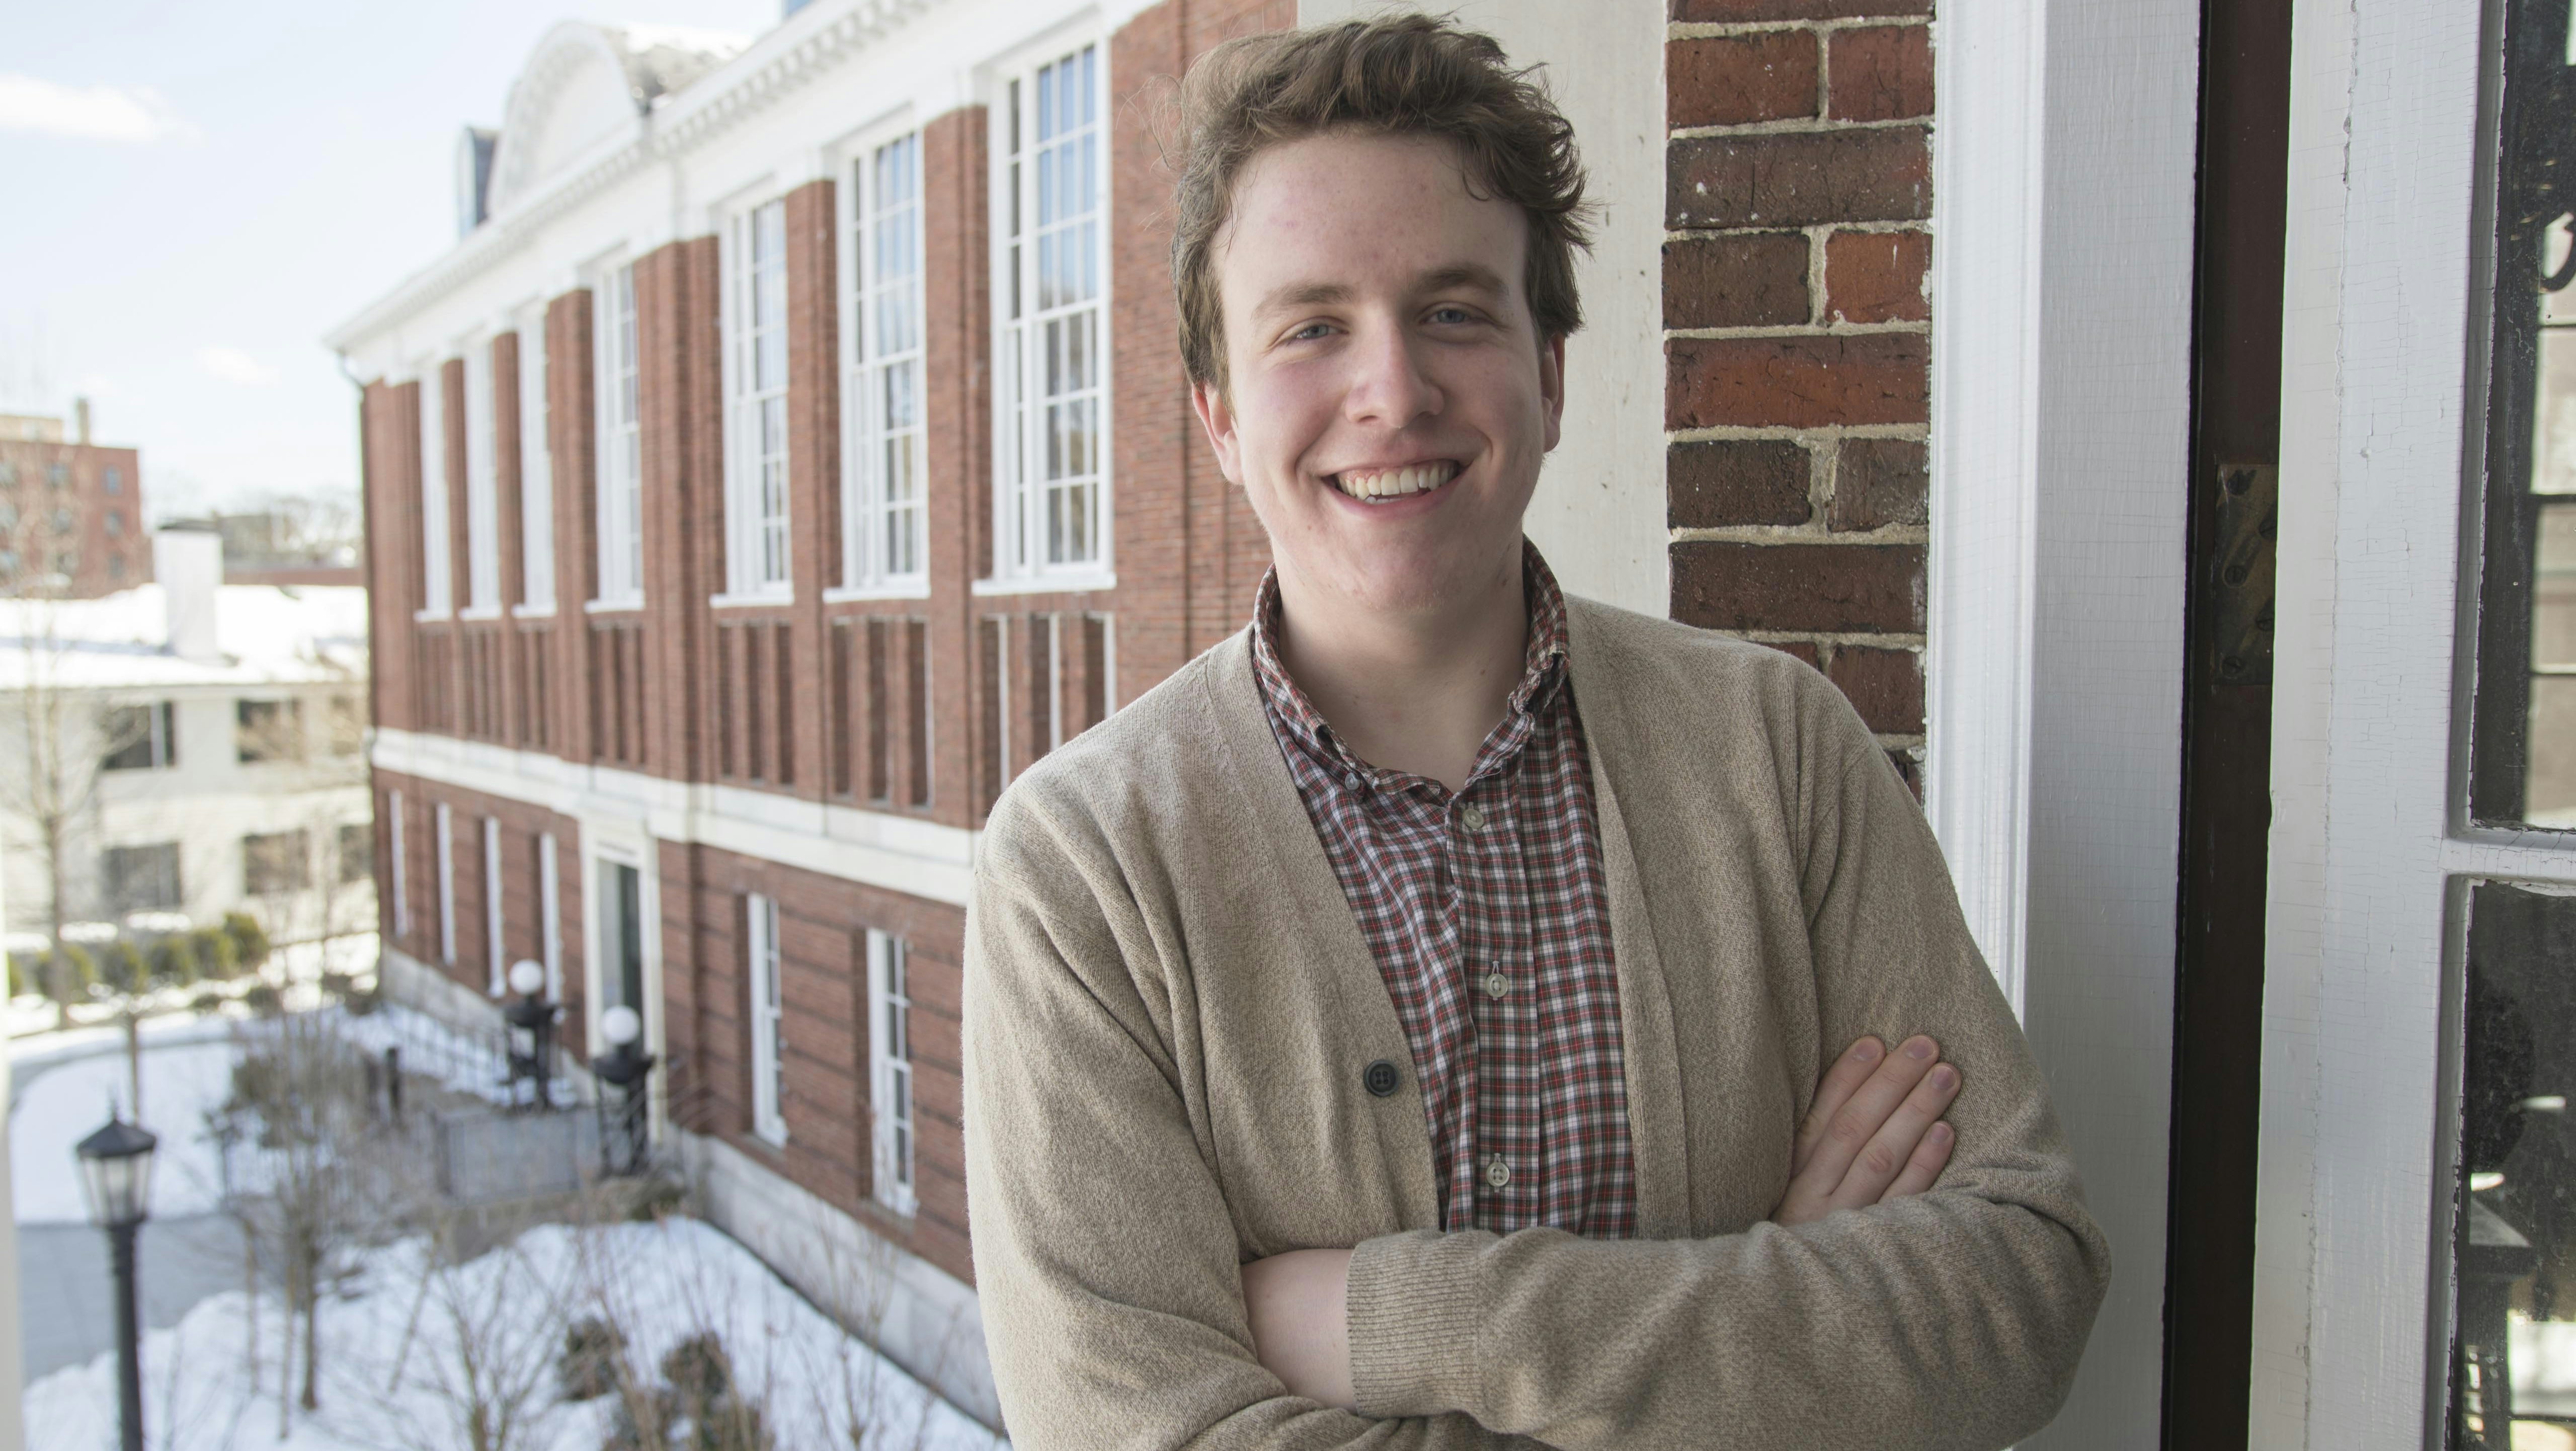 William Simmons '14, arms crossed and smiling, with the Schlesinger Library in the background